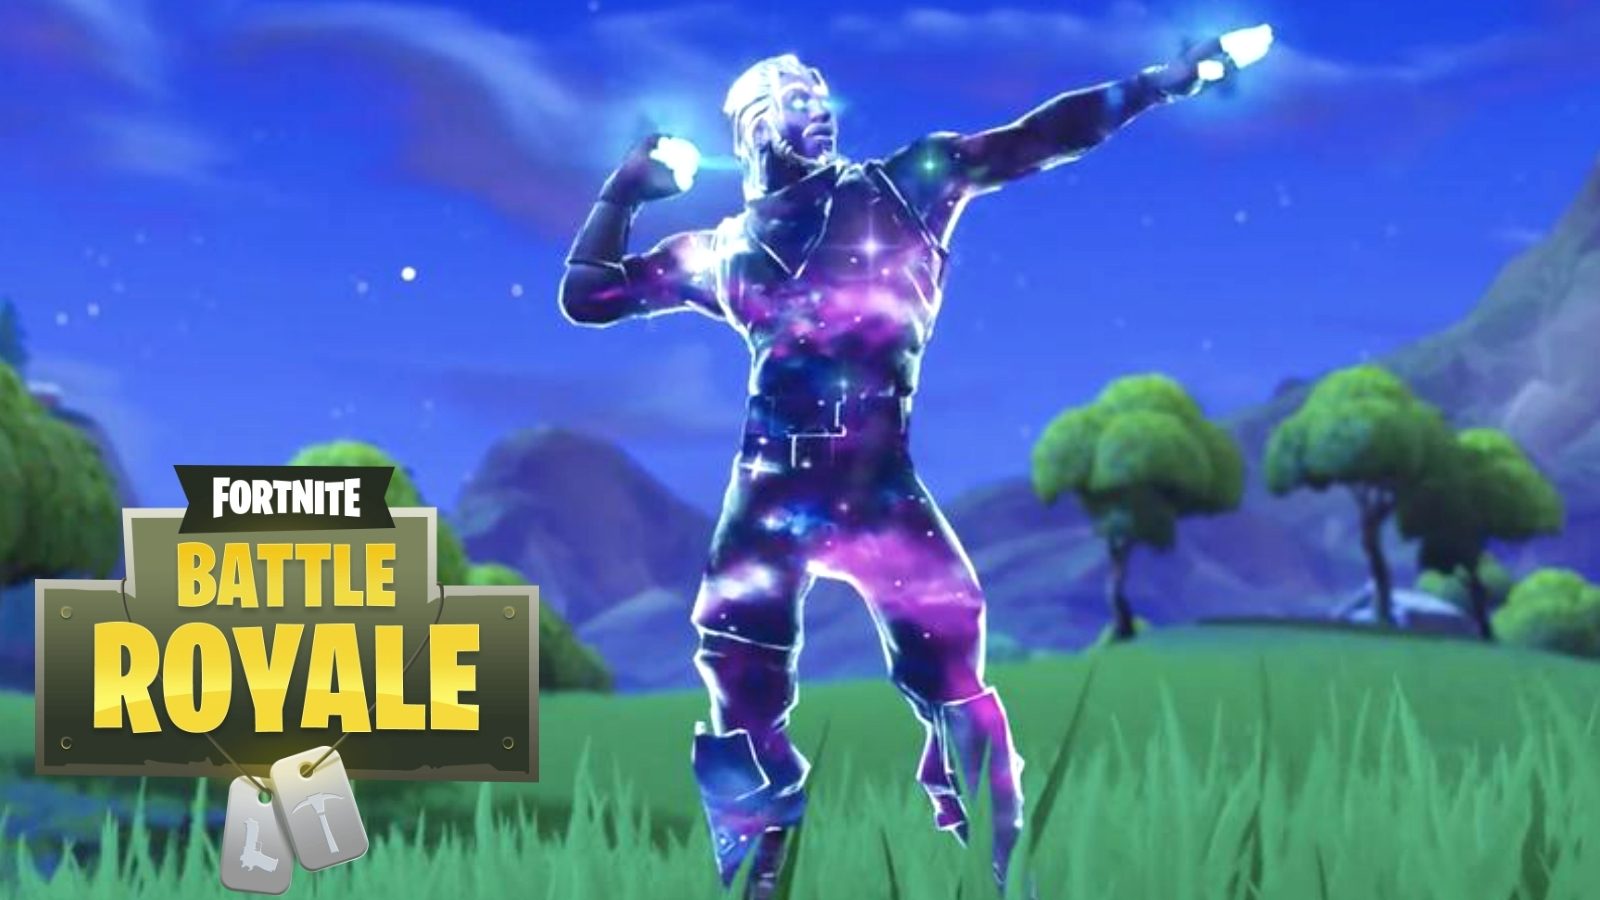 Updated Galaxy Fortnite Skin Is Set For Worldwide Release To Be